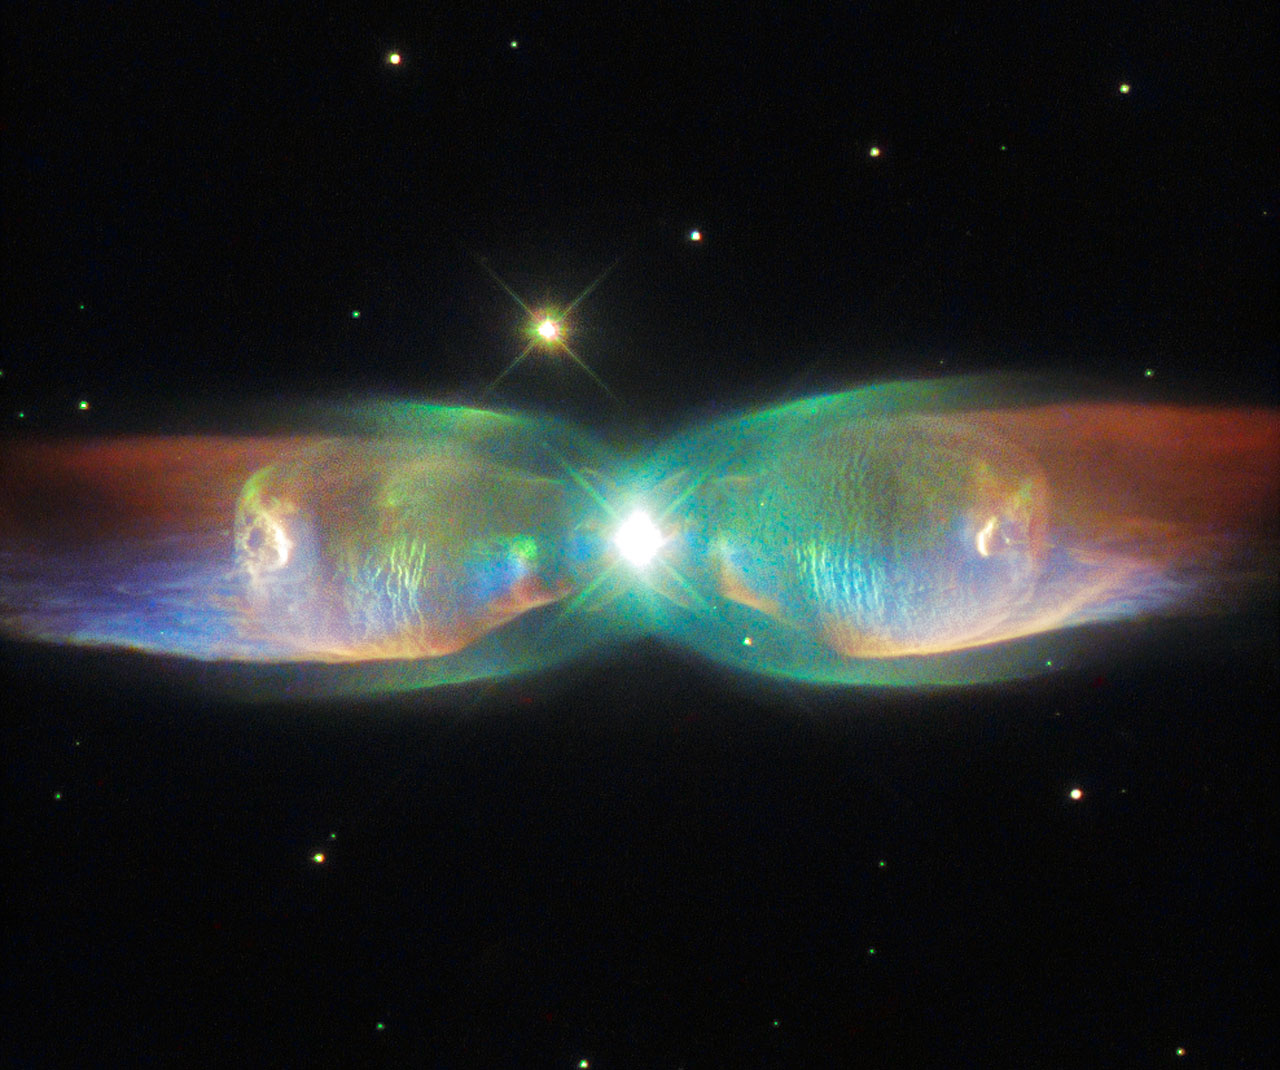 <span style="font-size:16px;position:relative;top:-50px">[Credit: ESA/Hubble & NASA. Acknowledgement: Judy Schmidt](http://sci.esa.int/hubble/56391-the-wings-of-the-butterfly-heic1518/)</span>